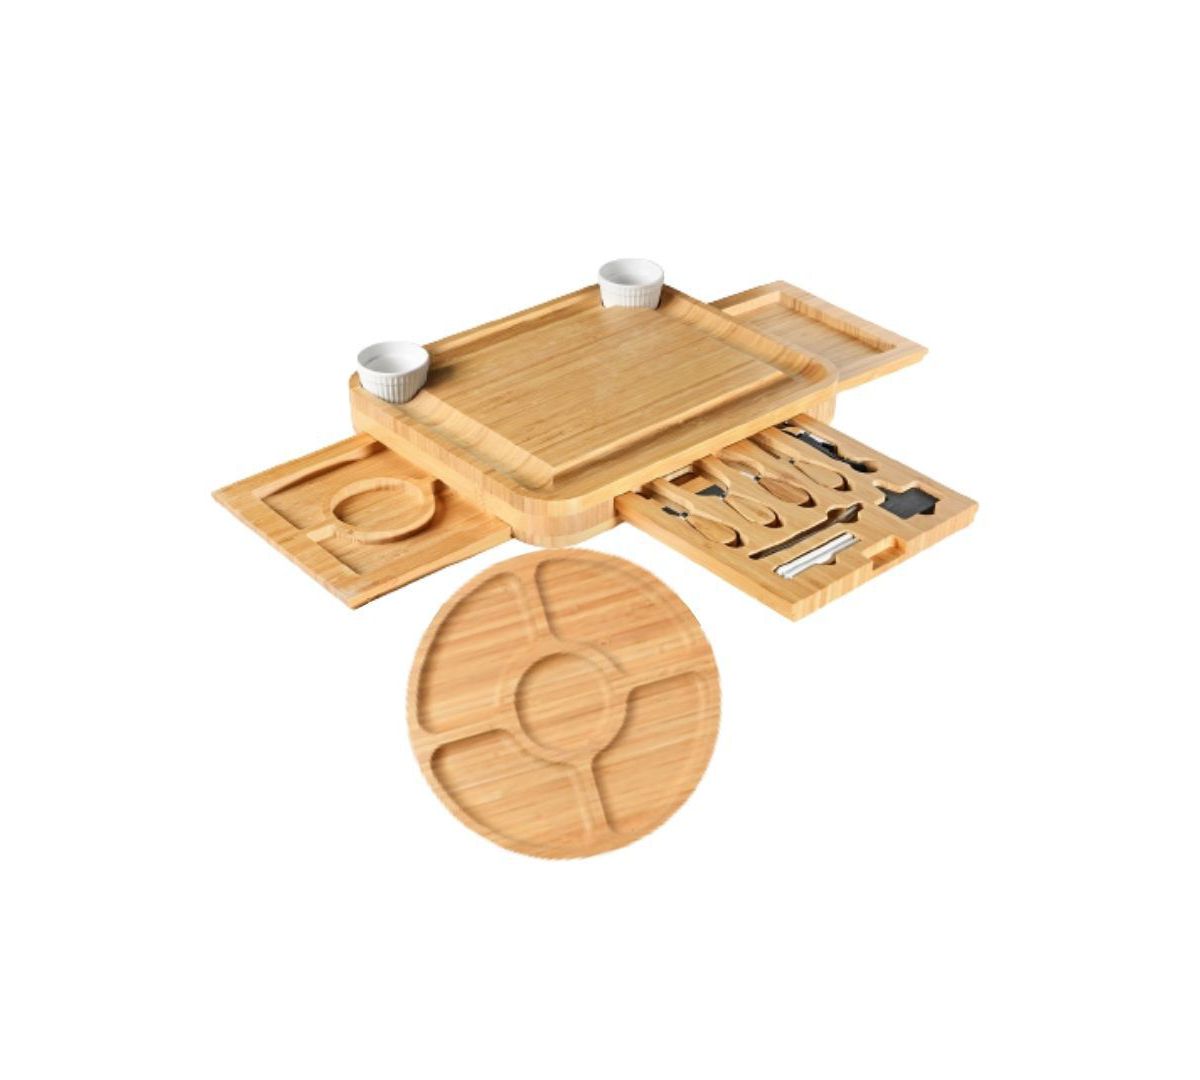 Bamboo Cheese and Meat Board - Simple Charcuterie Board with Serving Utensils Home I